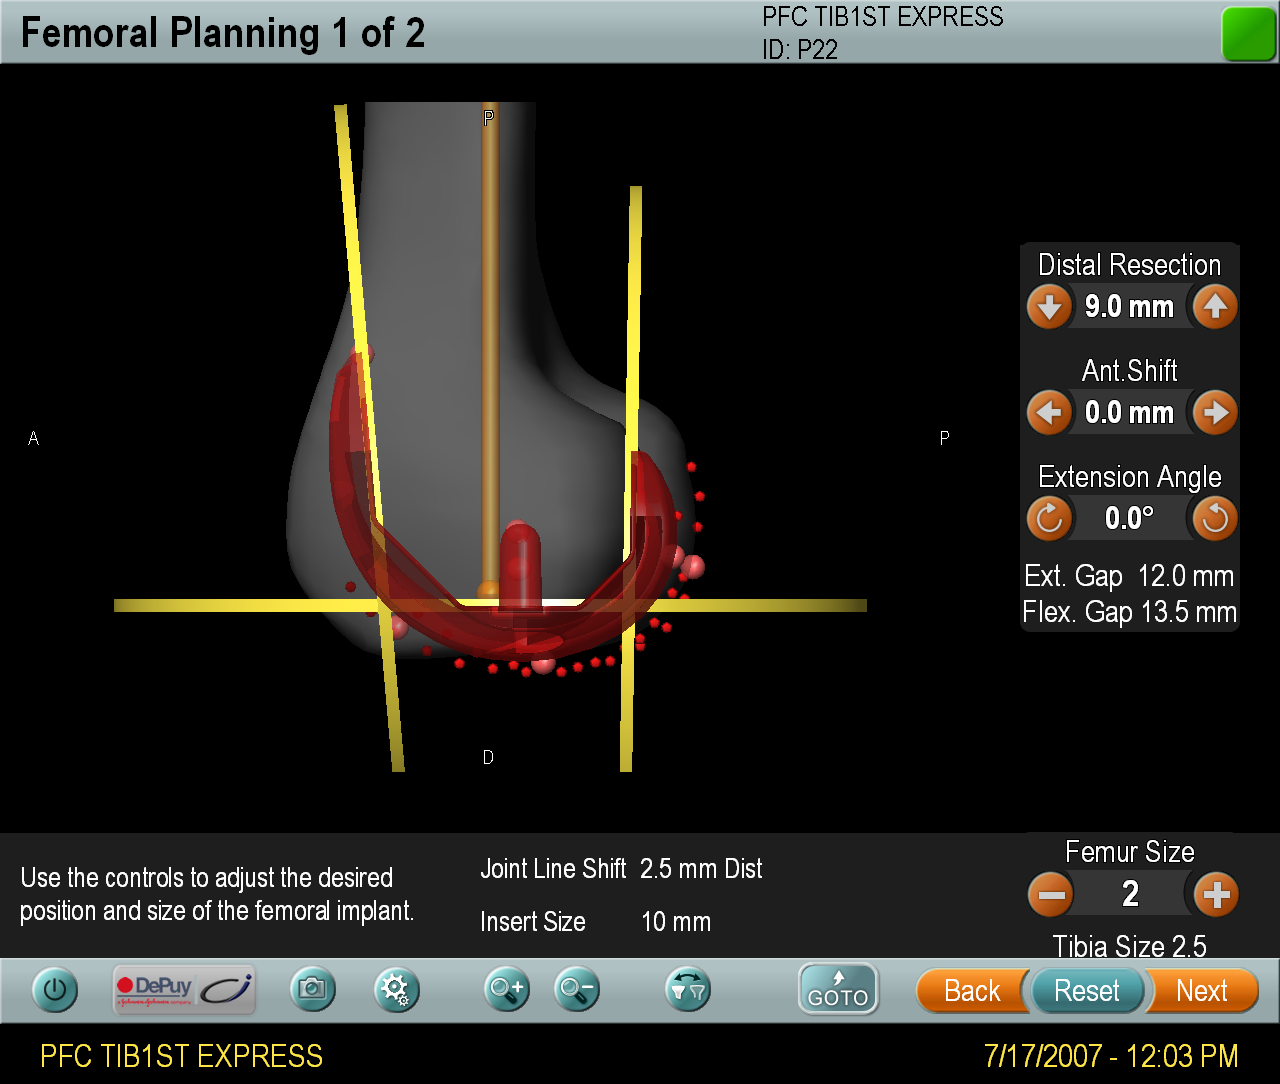 PFCTIB1STEXPRESS_Automatic_Planning_Femoral_1_Initial.png